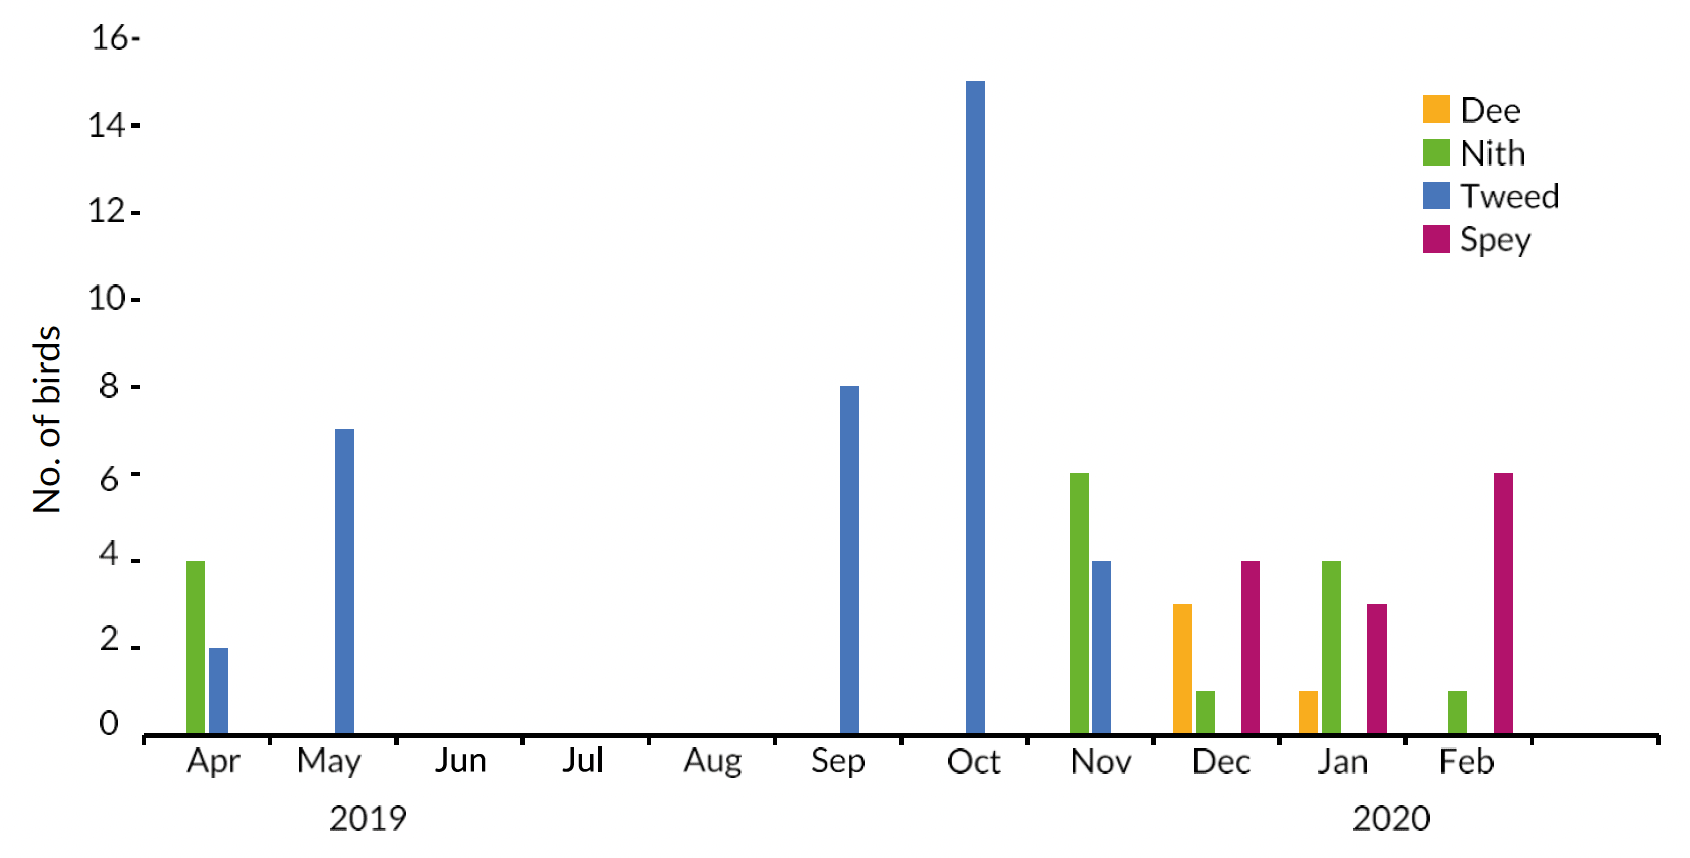 Bar chart showing monthly numbers of Cormorants sampled on each river during the study period (March 2019 - Feb 2020).